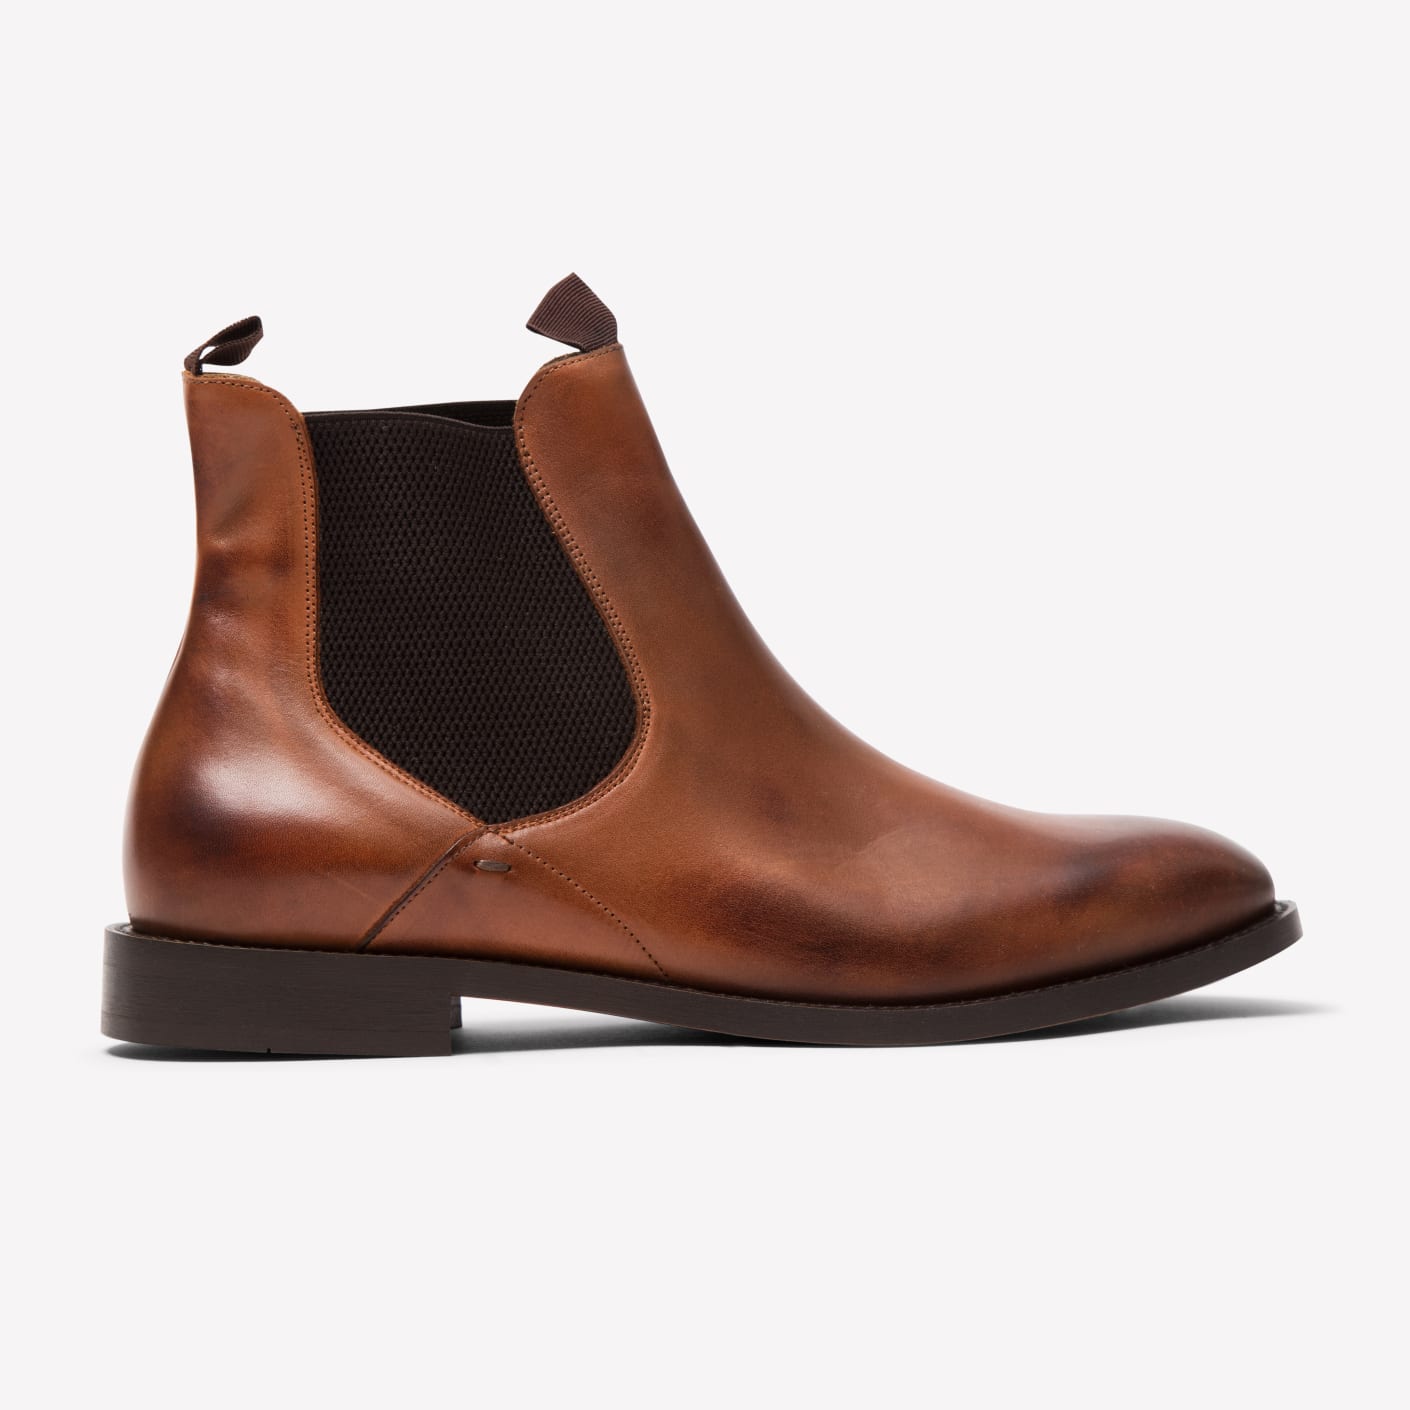 Hudson Shoes Exclusive Wynford Chelsea Boot – Cognac | Bespoke Post